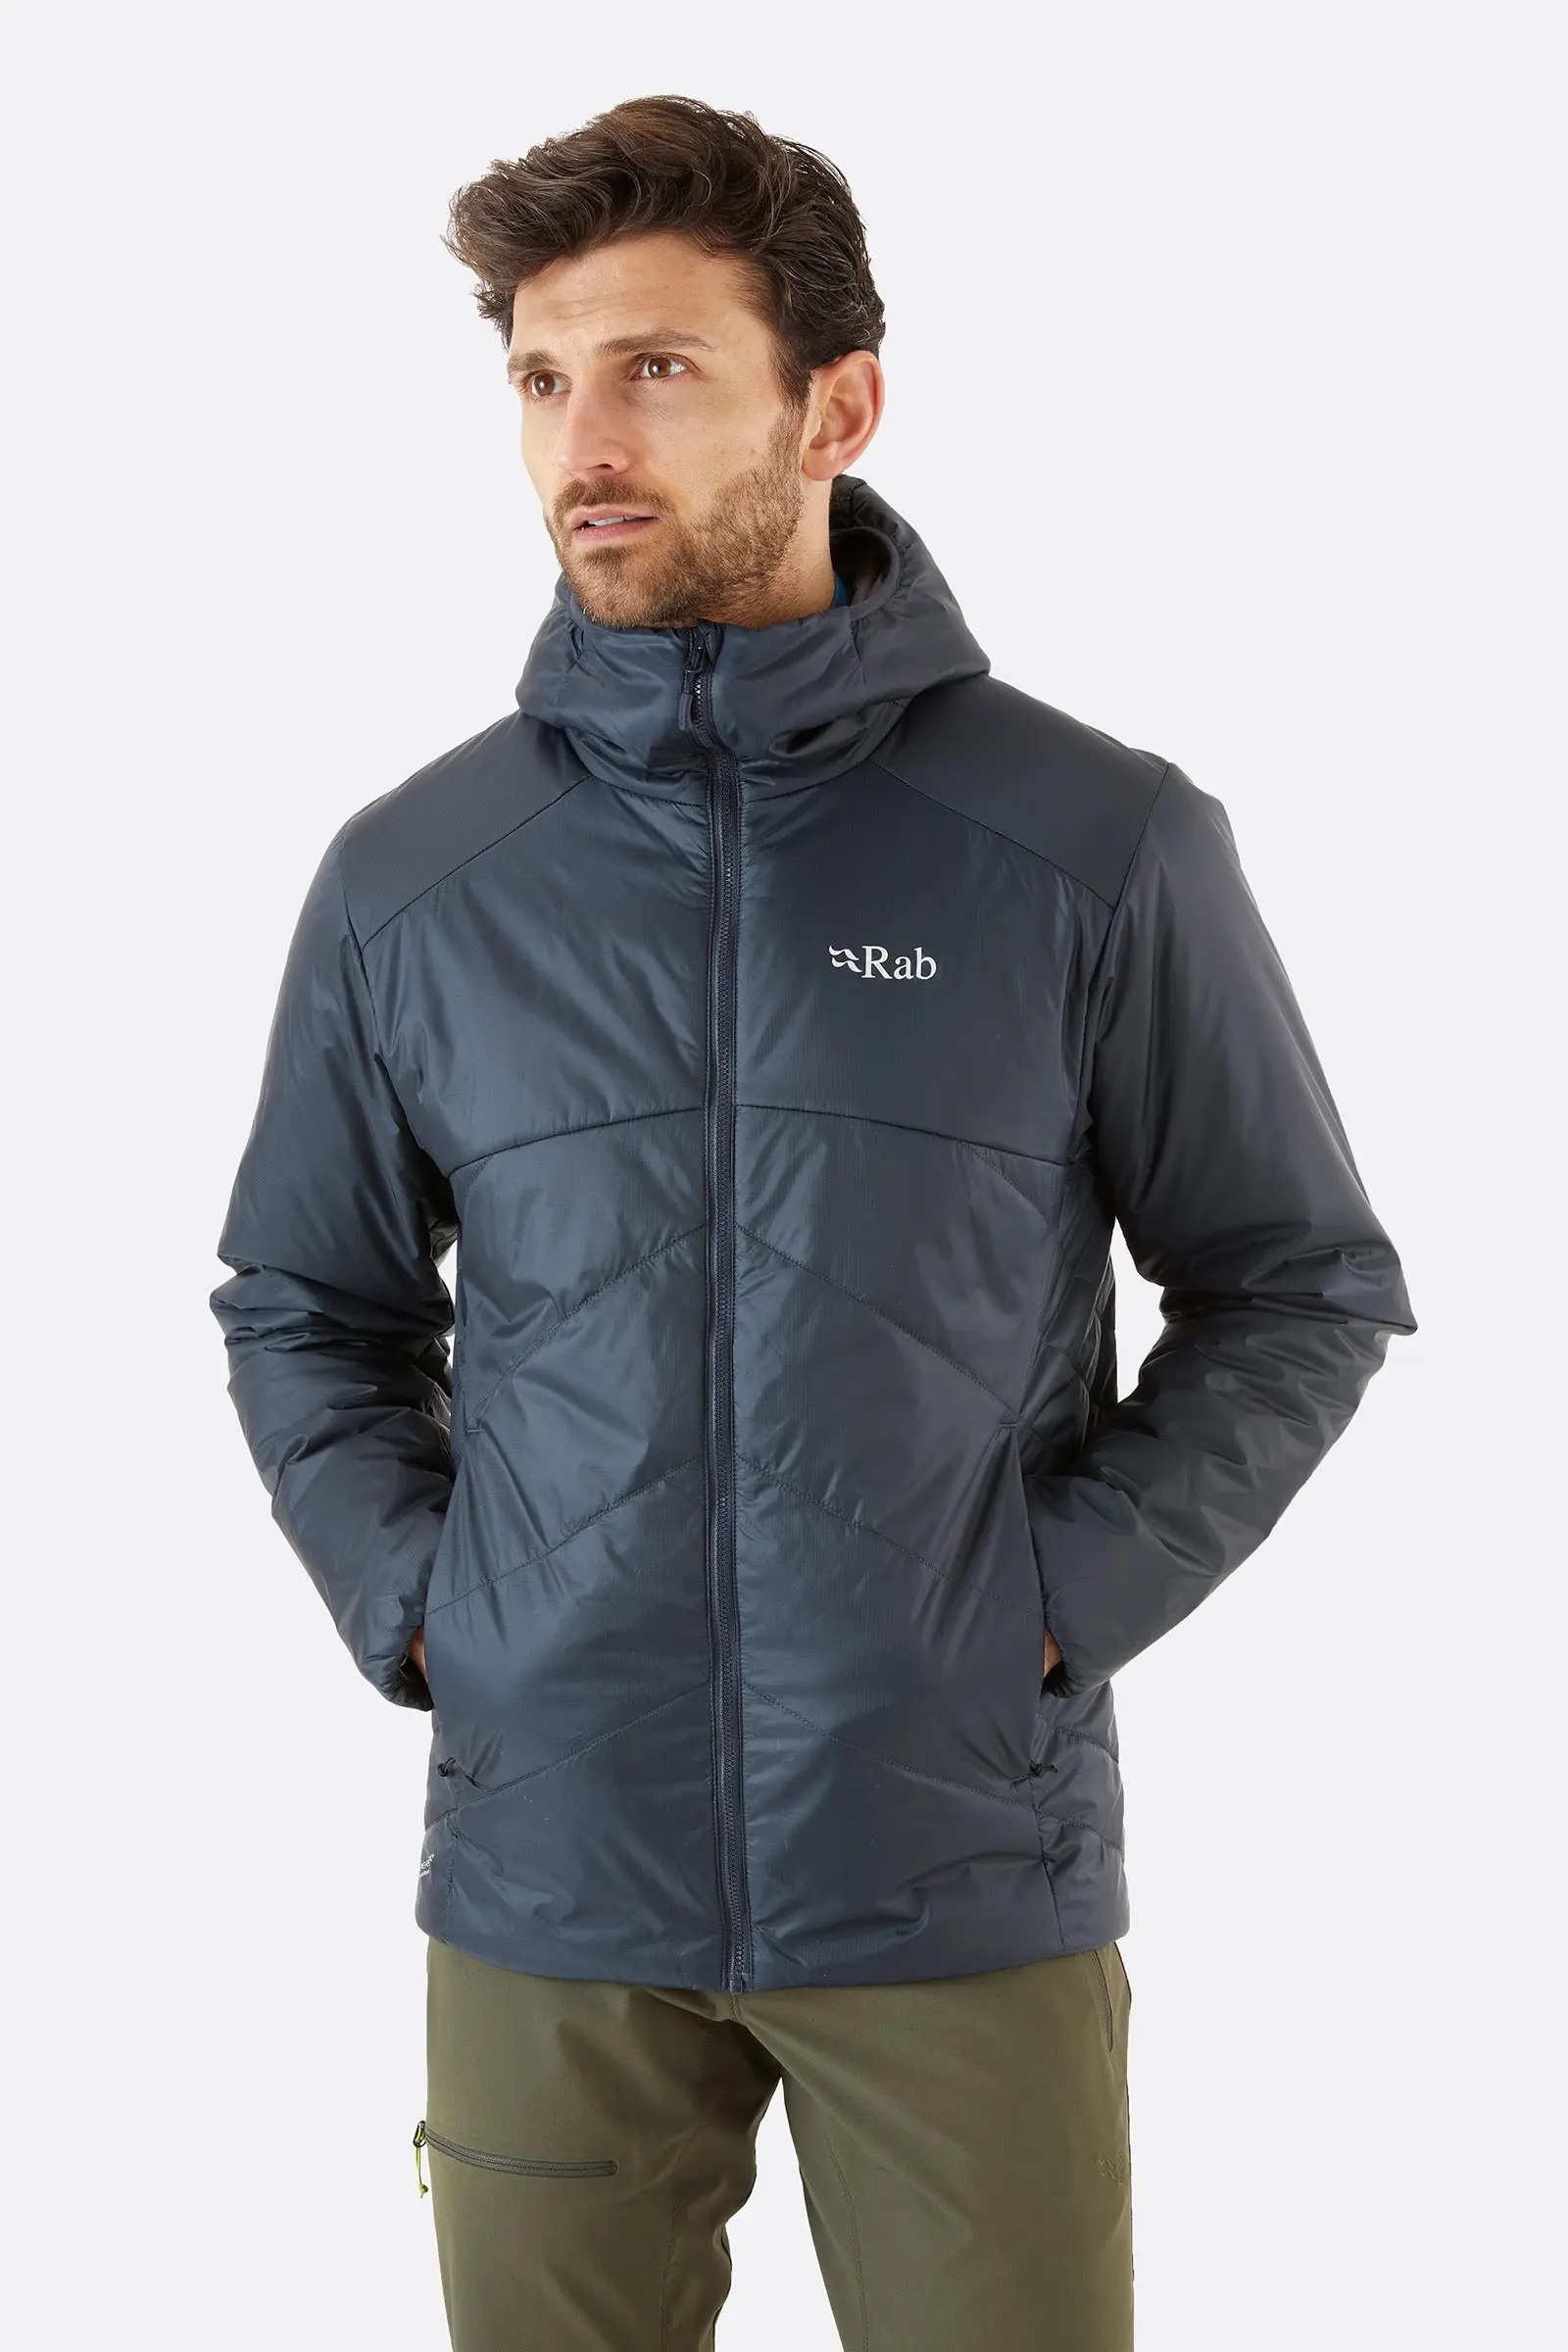 Rab Men's Xenon 2.0 Insulated Jacket - Backpackinglight.dk